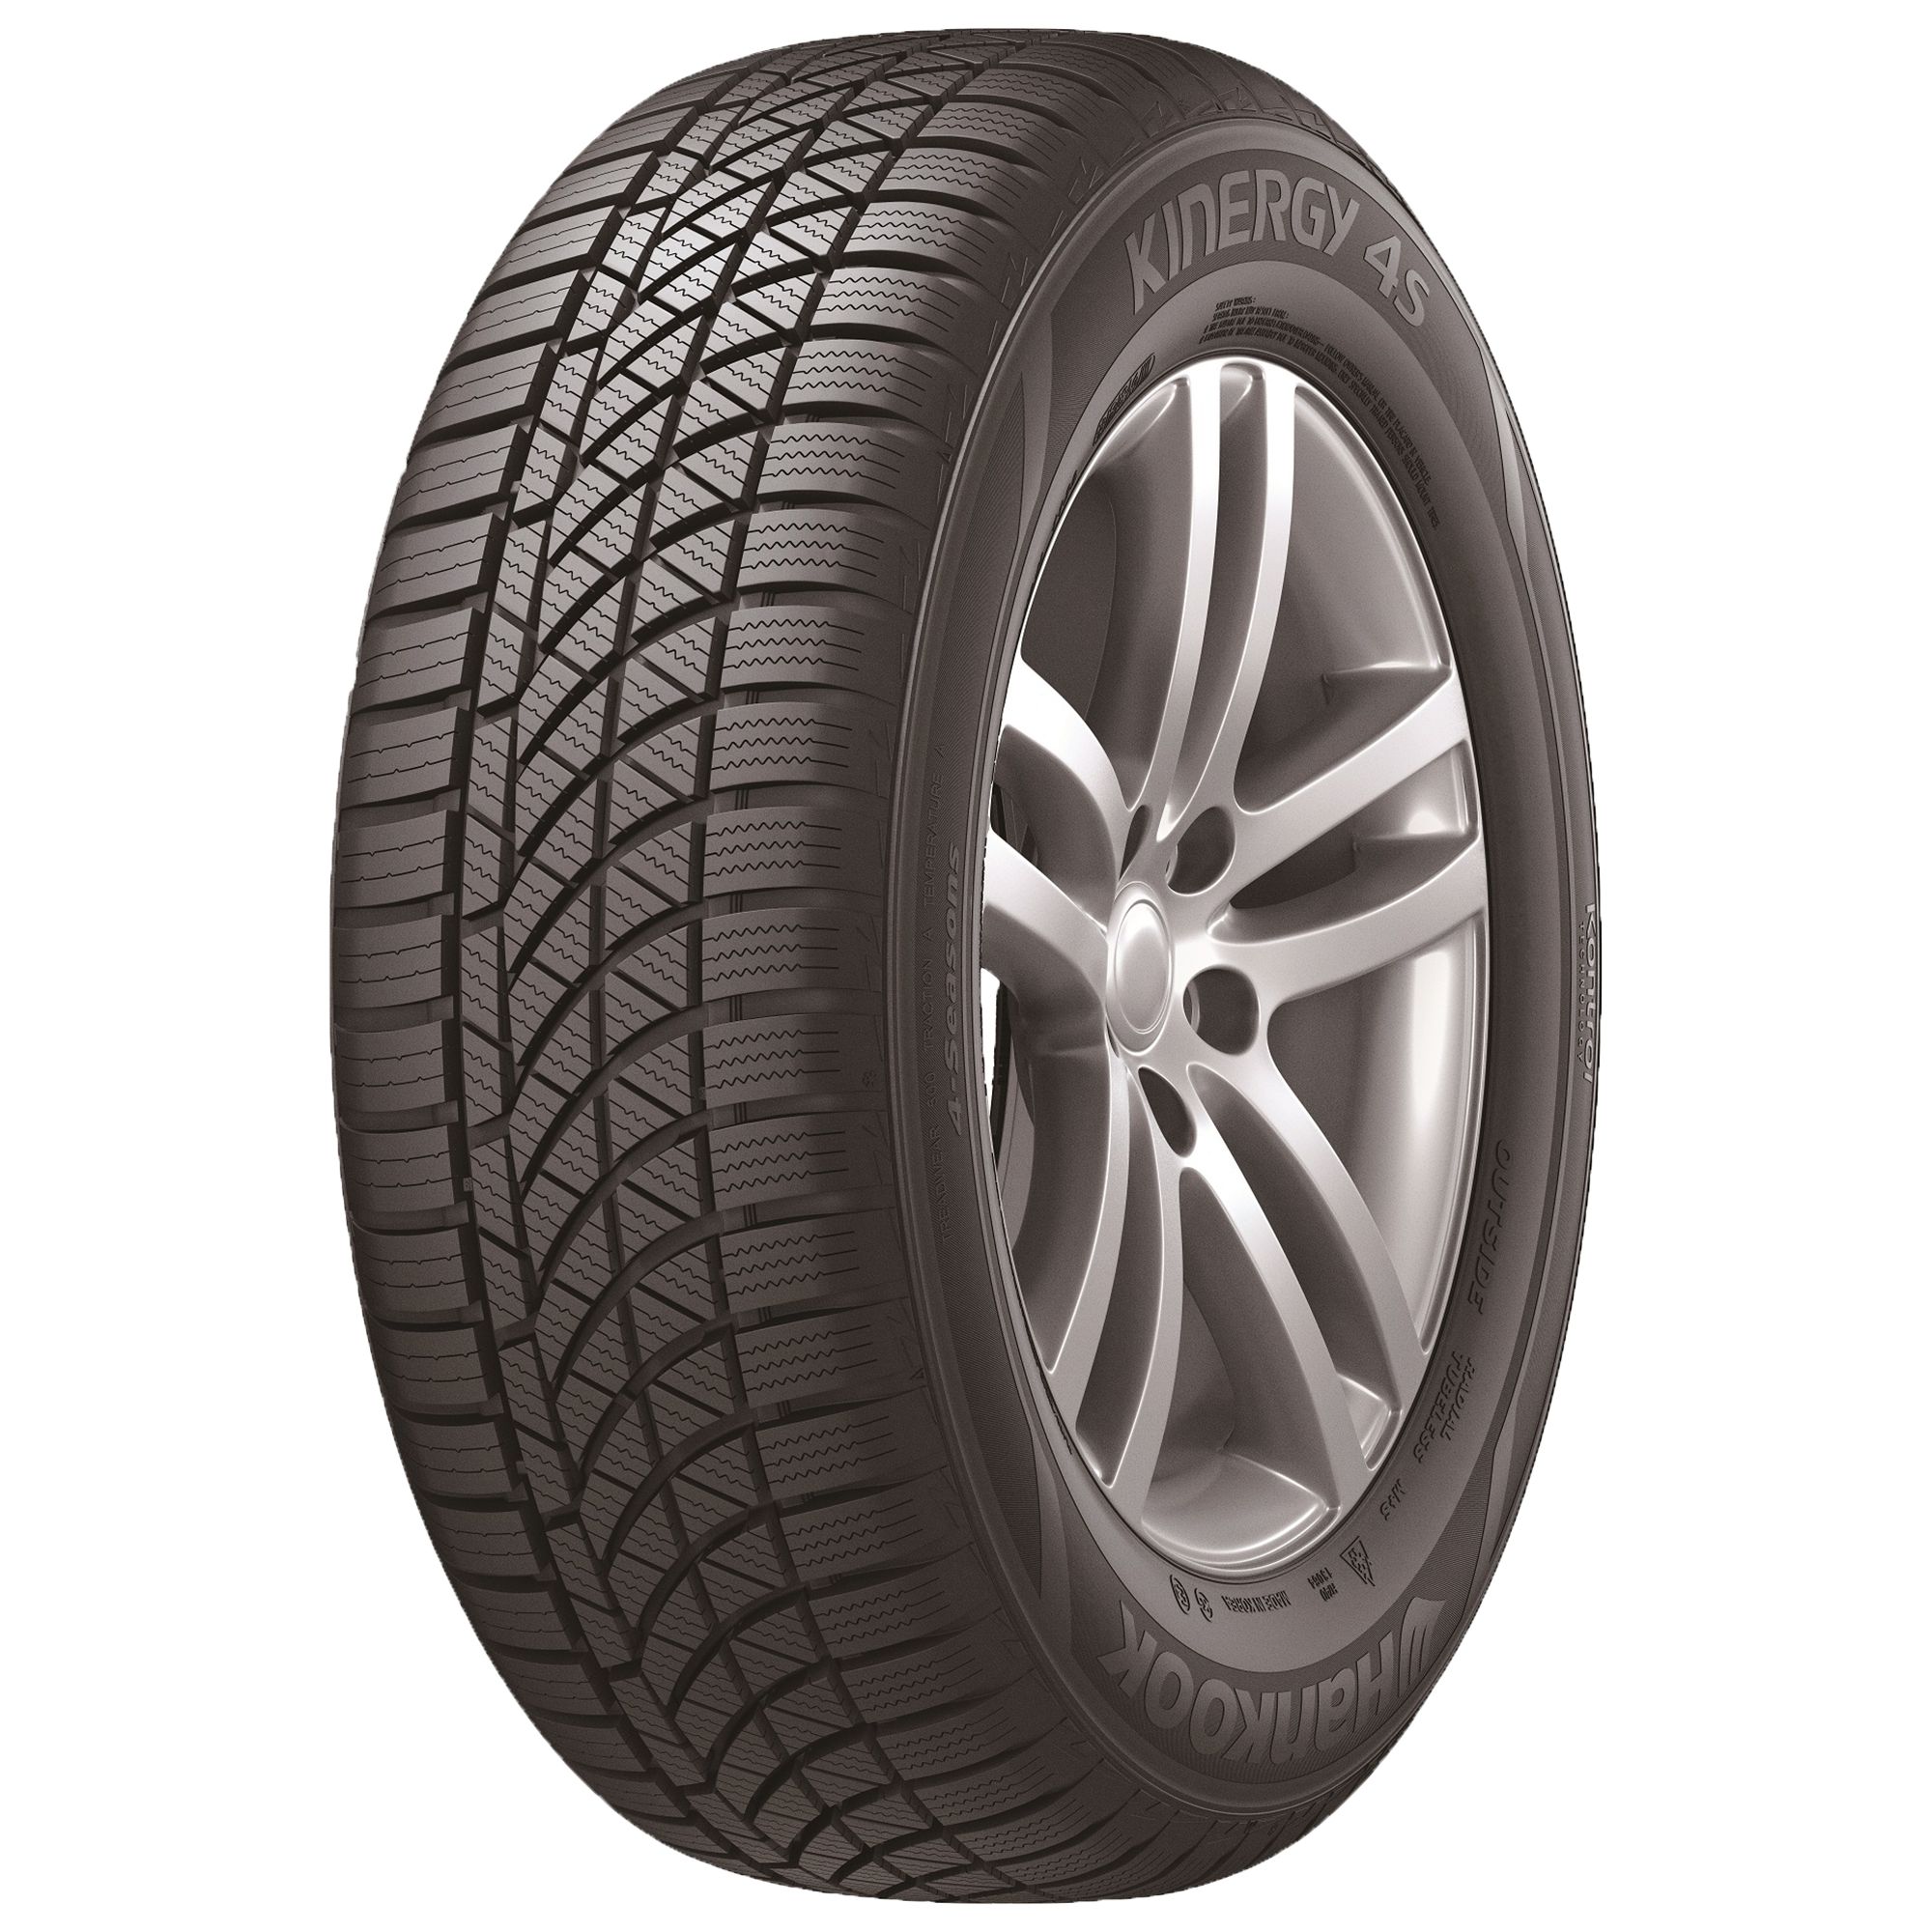 HANKOOK KINERGY 4S (H740) 165/70R14 81T BSW